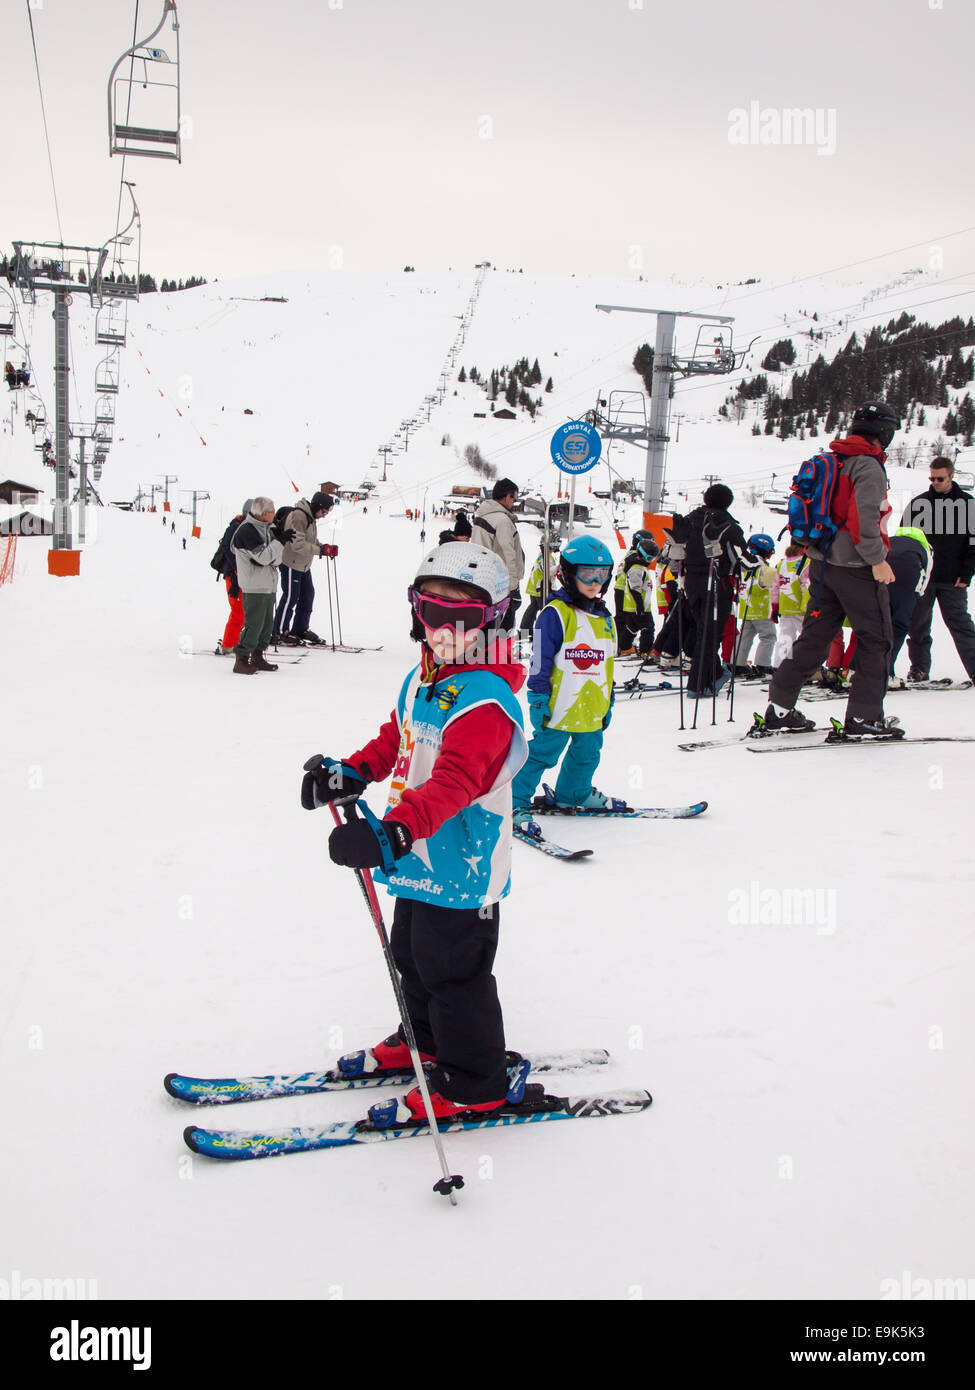 small girl on skis wearing ski clothes and helmet waiting  for a skiing lesson at a ski school collection point Stock Photo